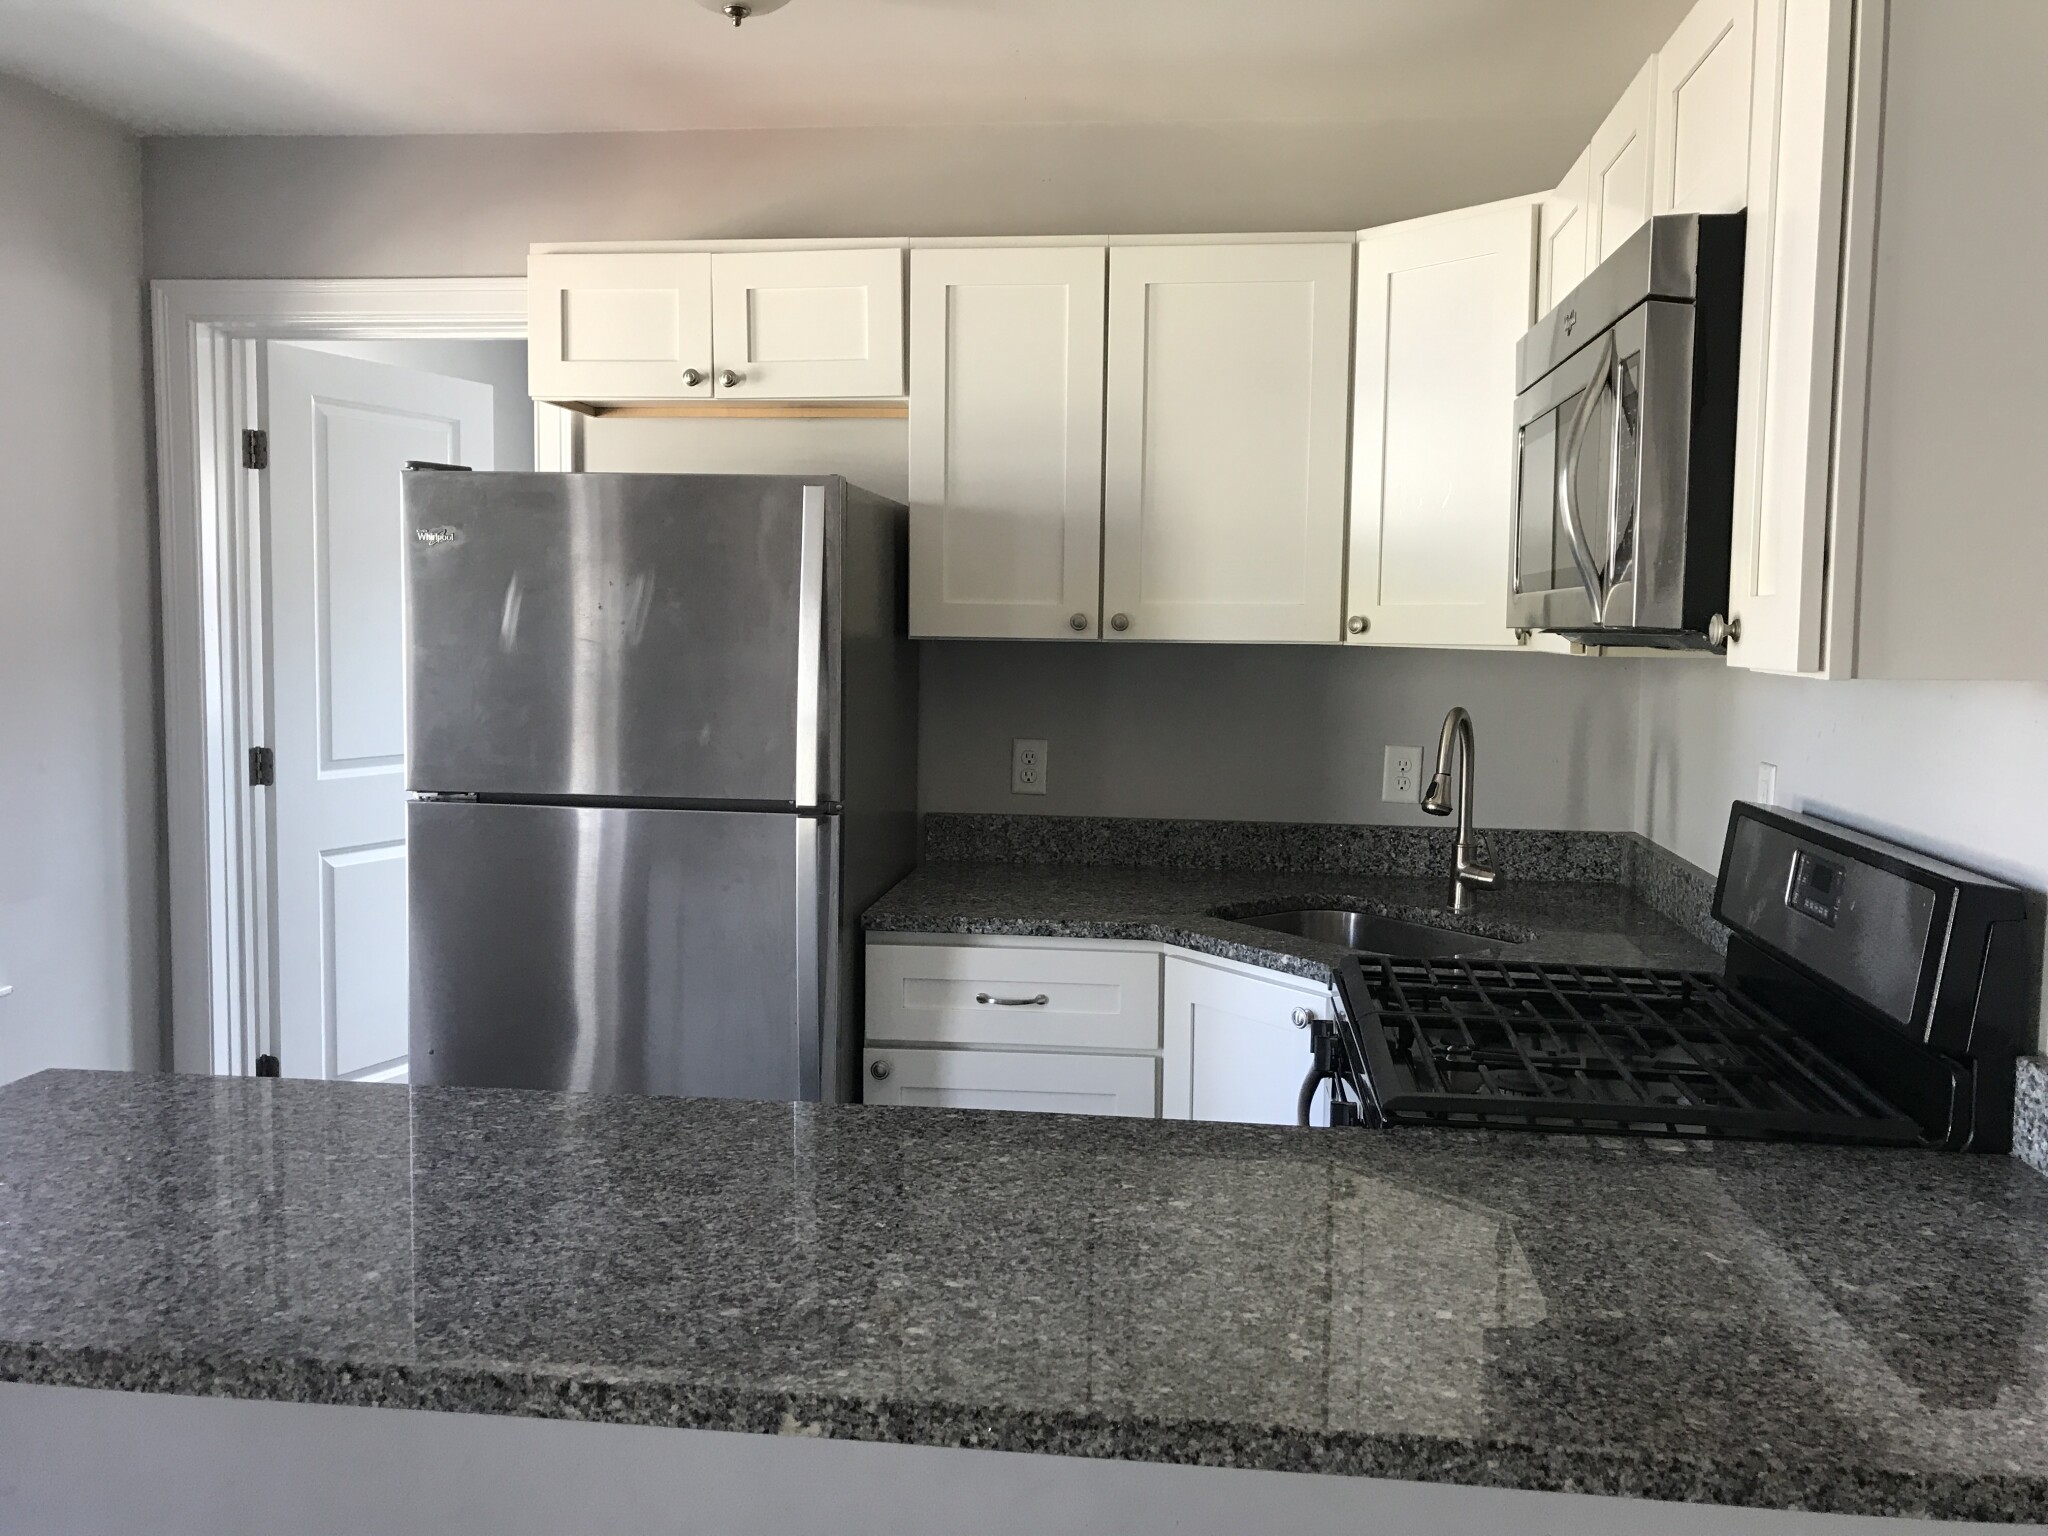 Photos of apartment on Safford,Quincy MA 02170